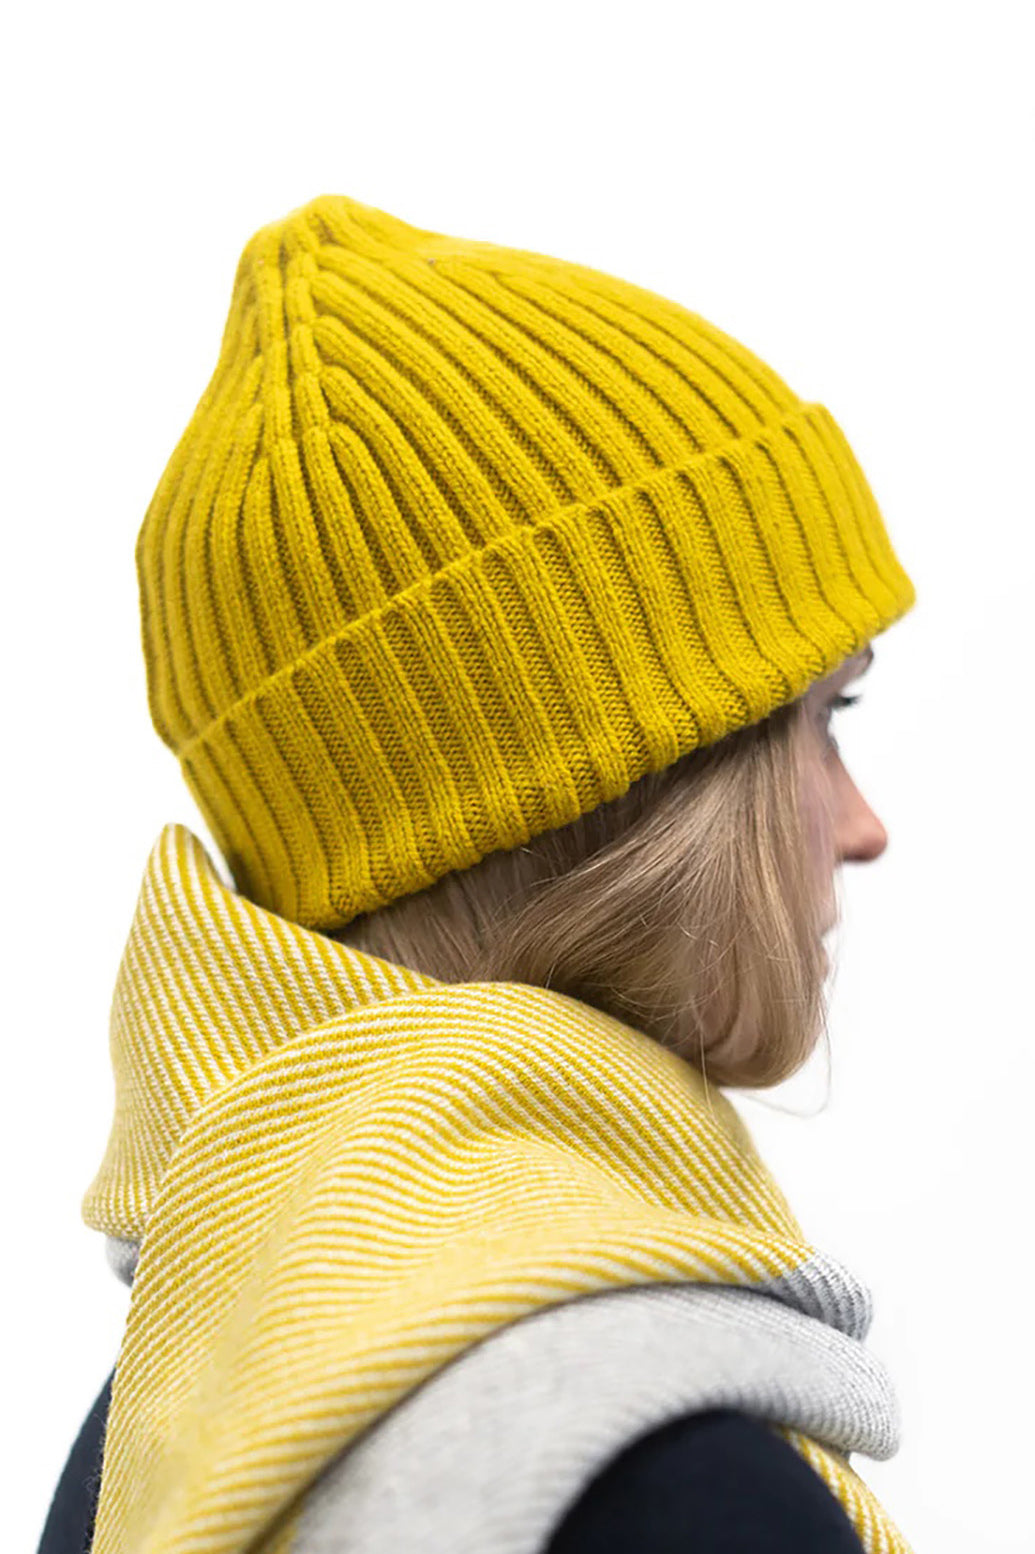 Knitted with a ribbed knit structure in a mustard yellow, this hat is a classic wardrobe staple. Made from the finest grade lambswool spun in Kinross